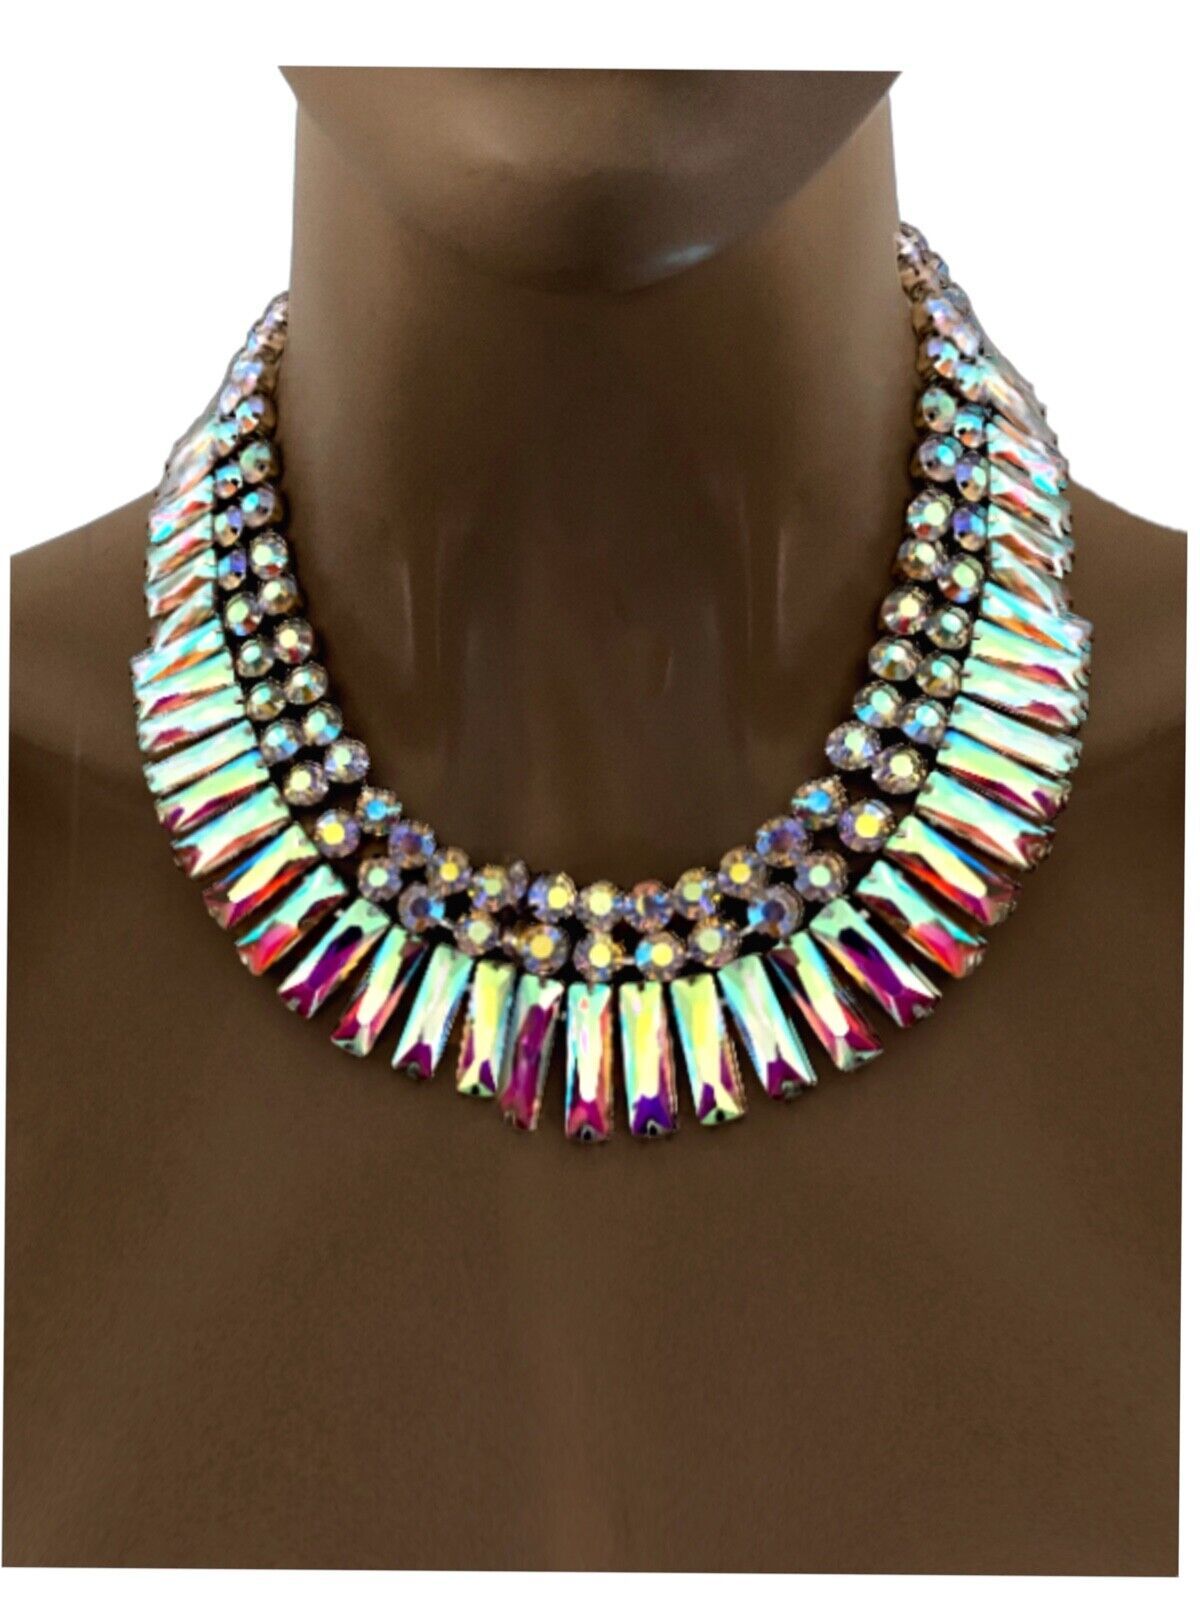 Primary image for Luxurious Aurora Borealis Crystals Evening Cleopatra Statement Necklace Set